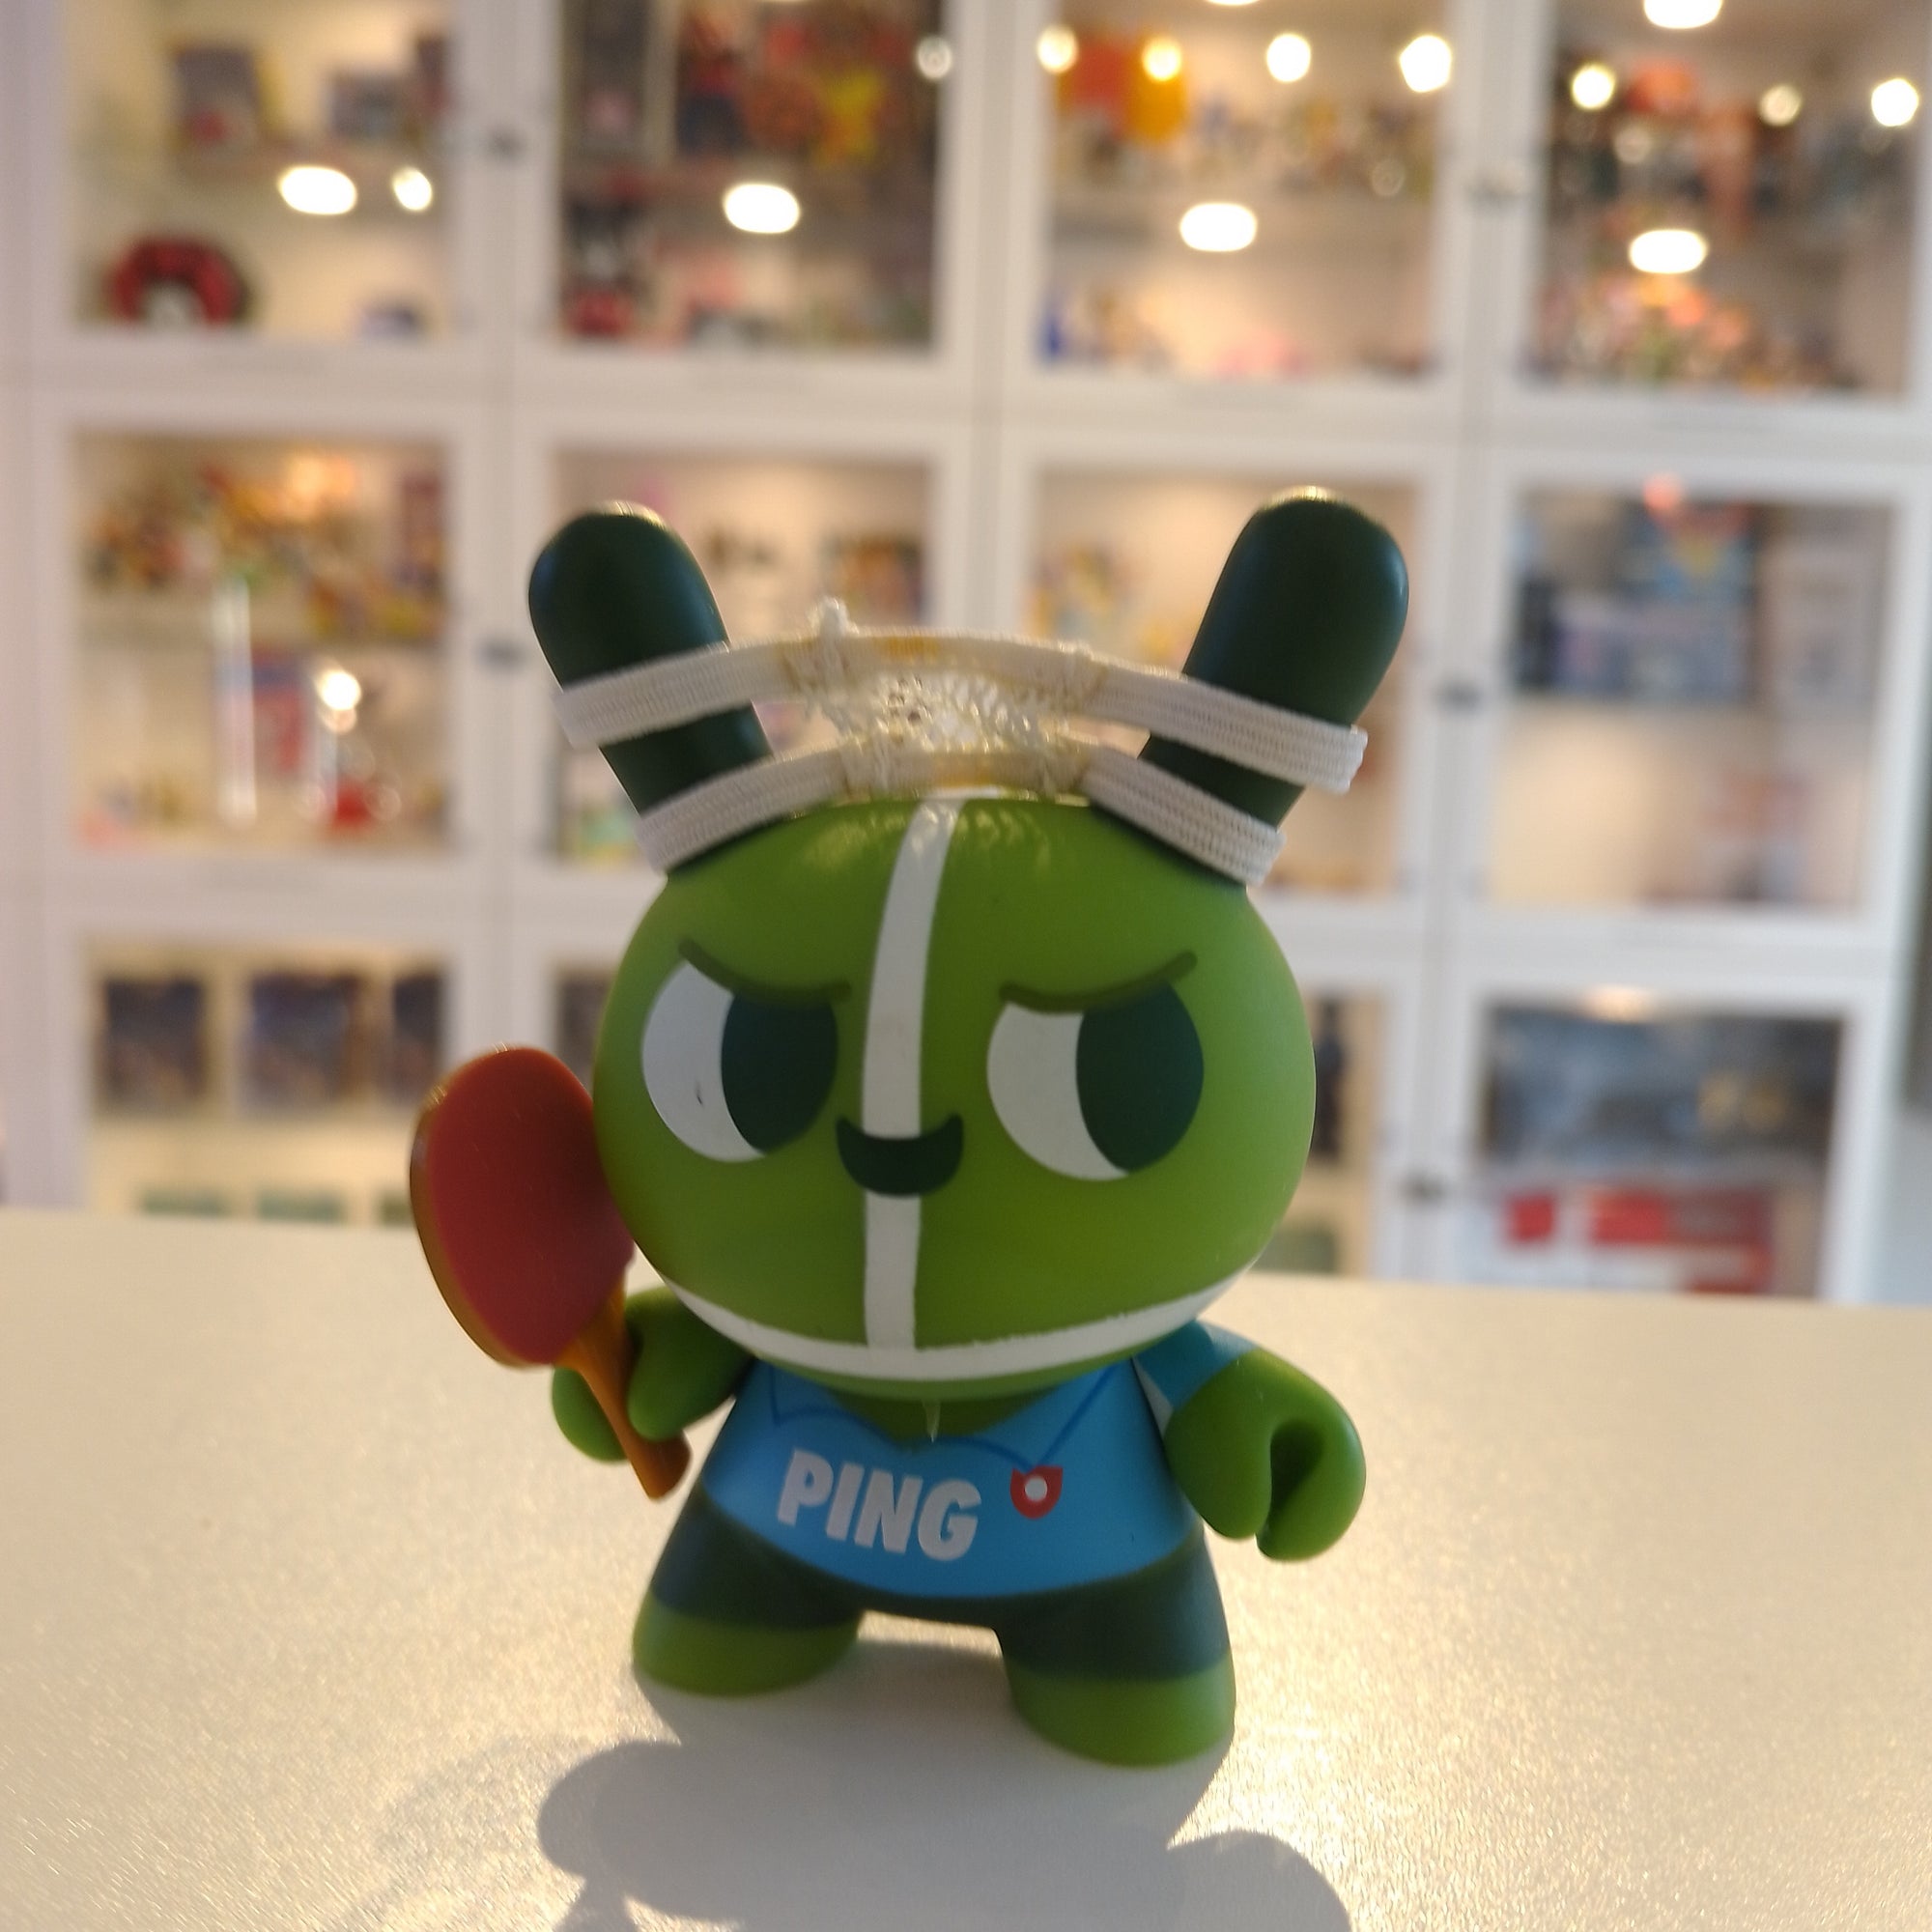 Ping - Dunny Series 2012 by Kidrobot